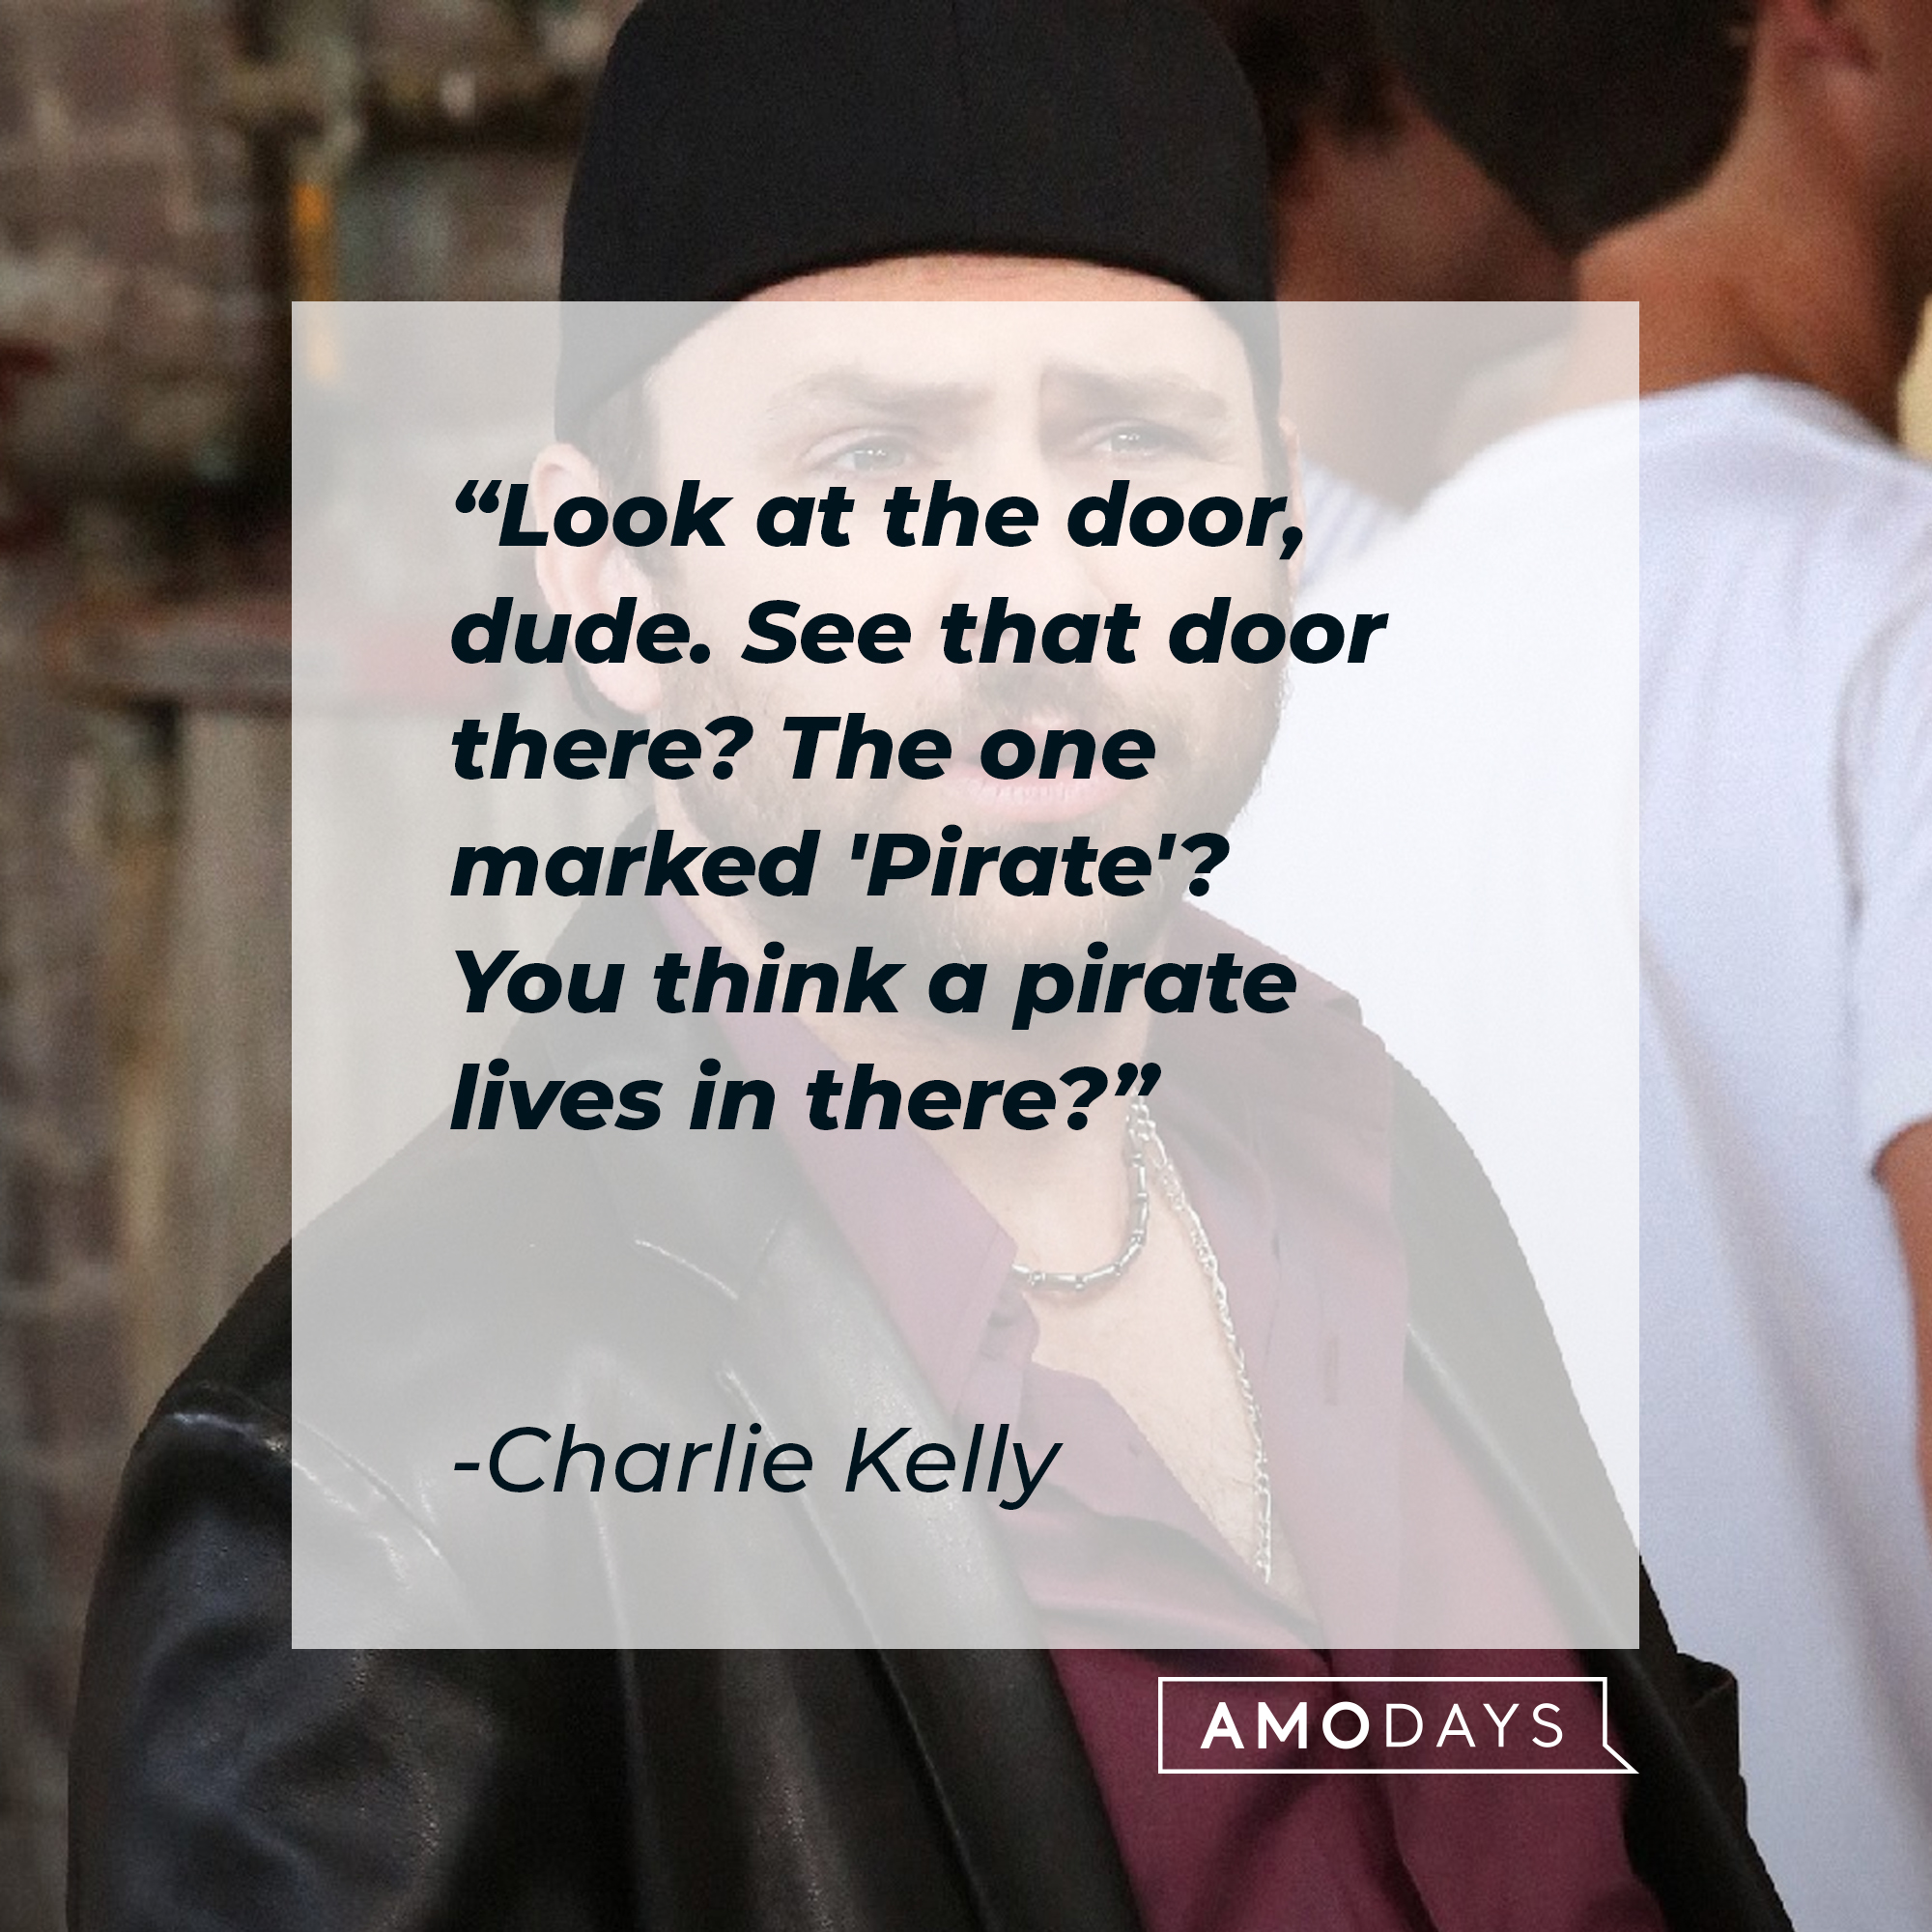 Charlie Kelly with his quote: "Look at the door, dude. See that door there? The one marked 'Pirate'? You think a pirate lives in there?" | Source: Facebook/alwayssunny